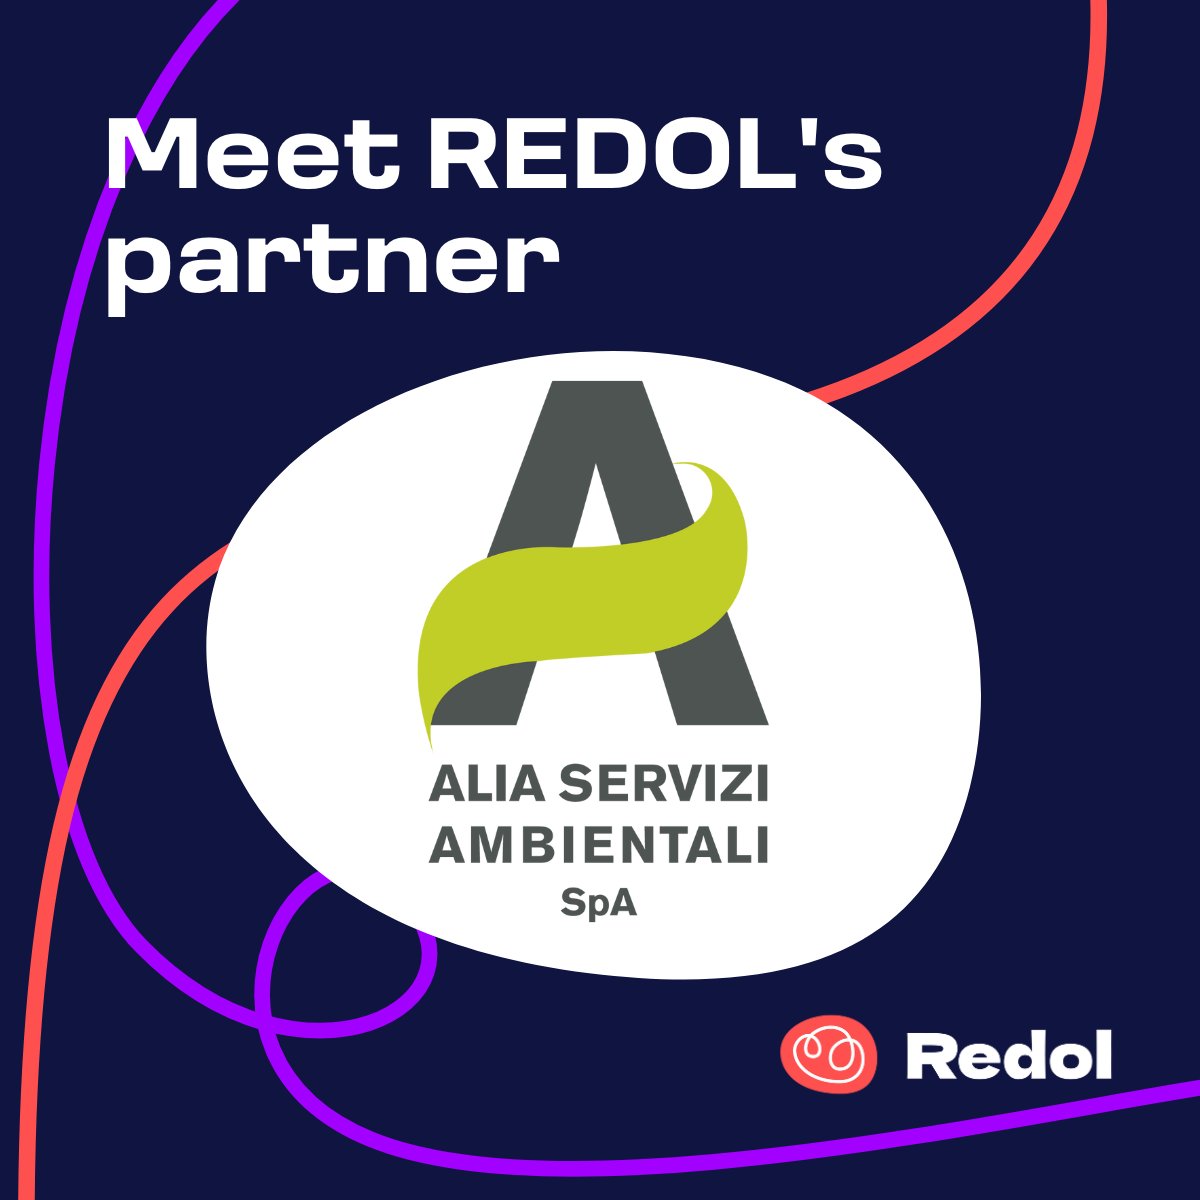 Say hello to @AliaServizi! 🚛 ALIA is a waste management company dedicated to providing environmental services in Tuscany

🔄 In REDOL, ALIA will demonstrate a novel textile waste sorting system using hyperspectral imaging to focus on colour, composition & garment structure.